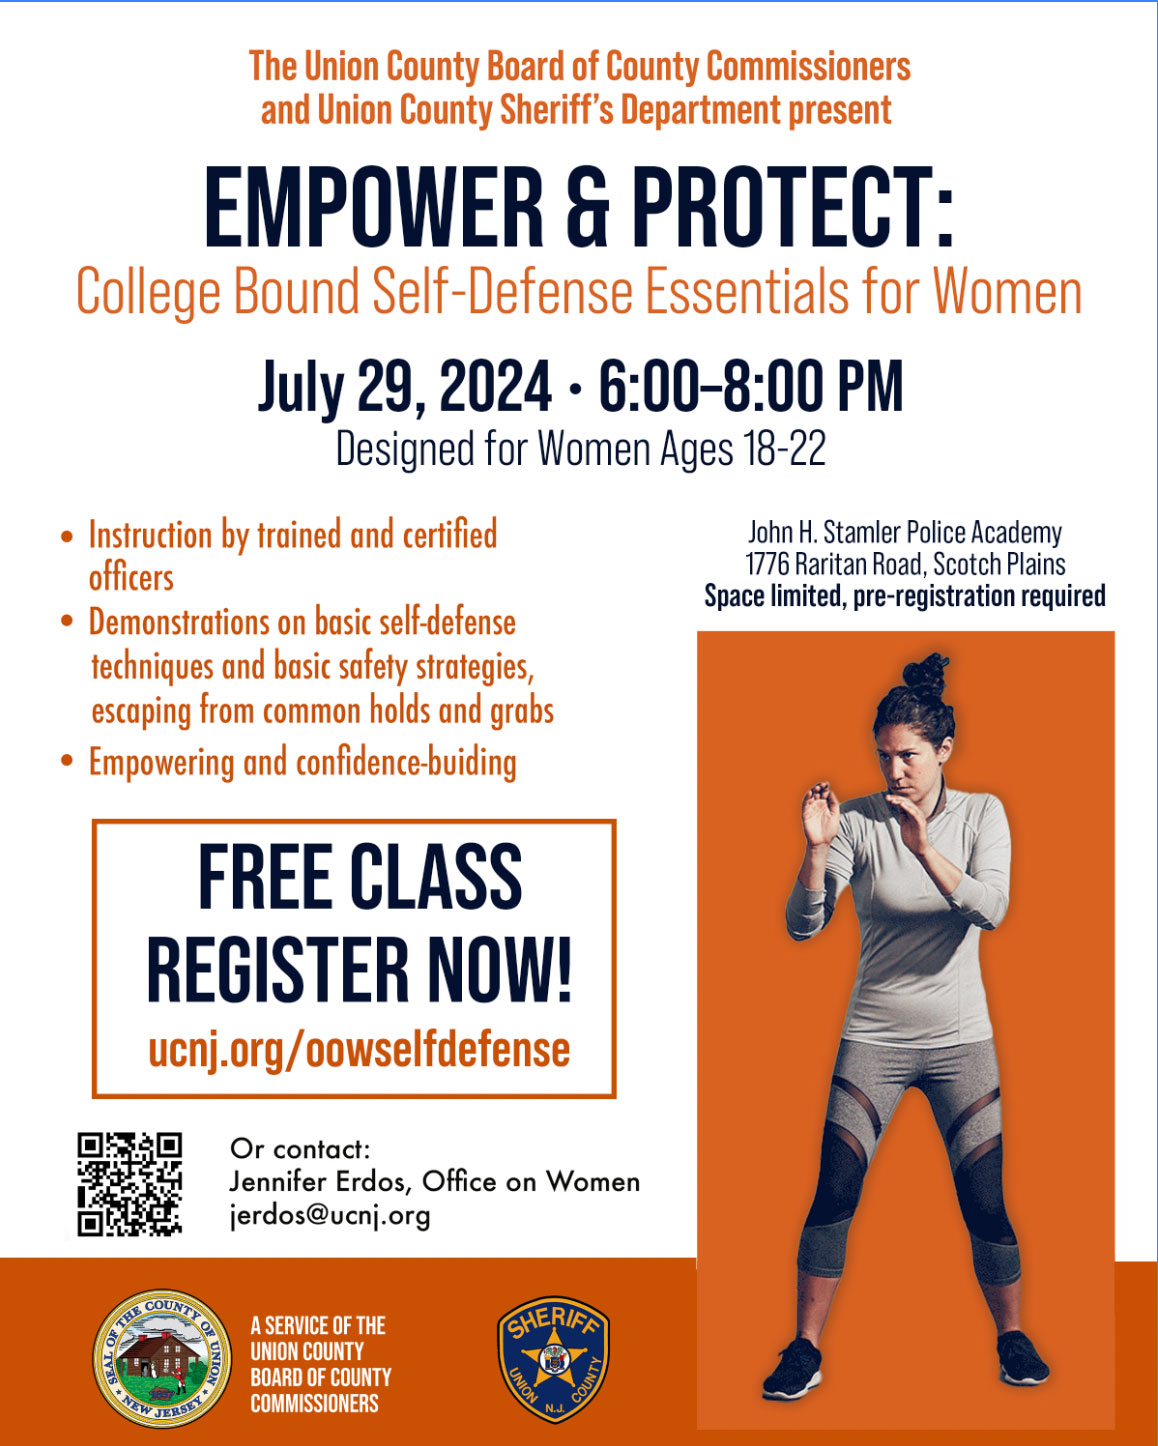 Union County to Host Self-Defense Class for College-Bound Young Women